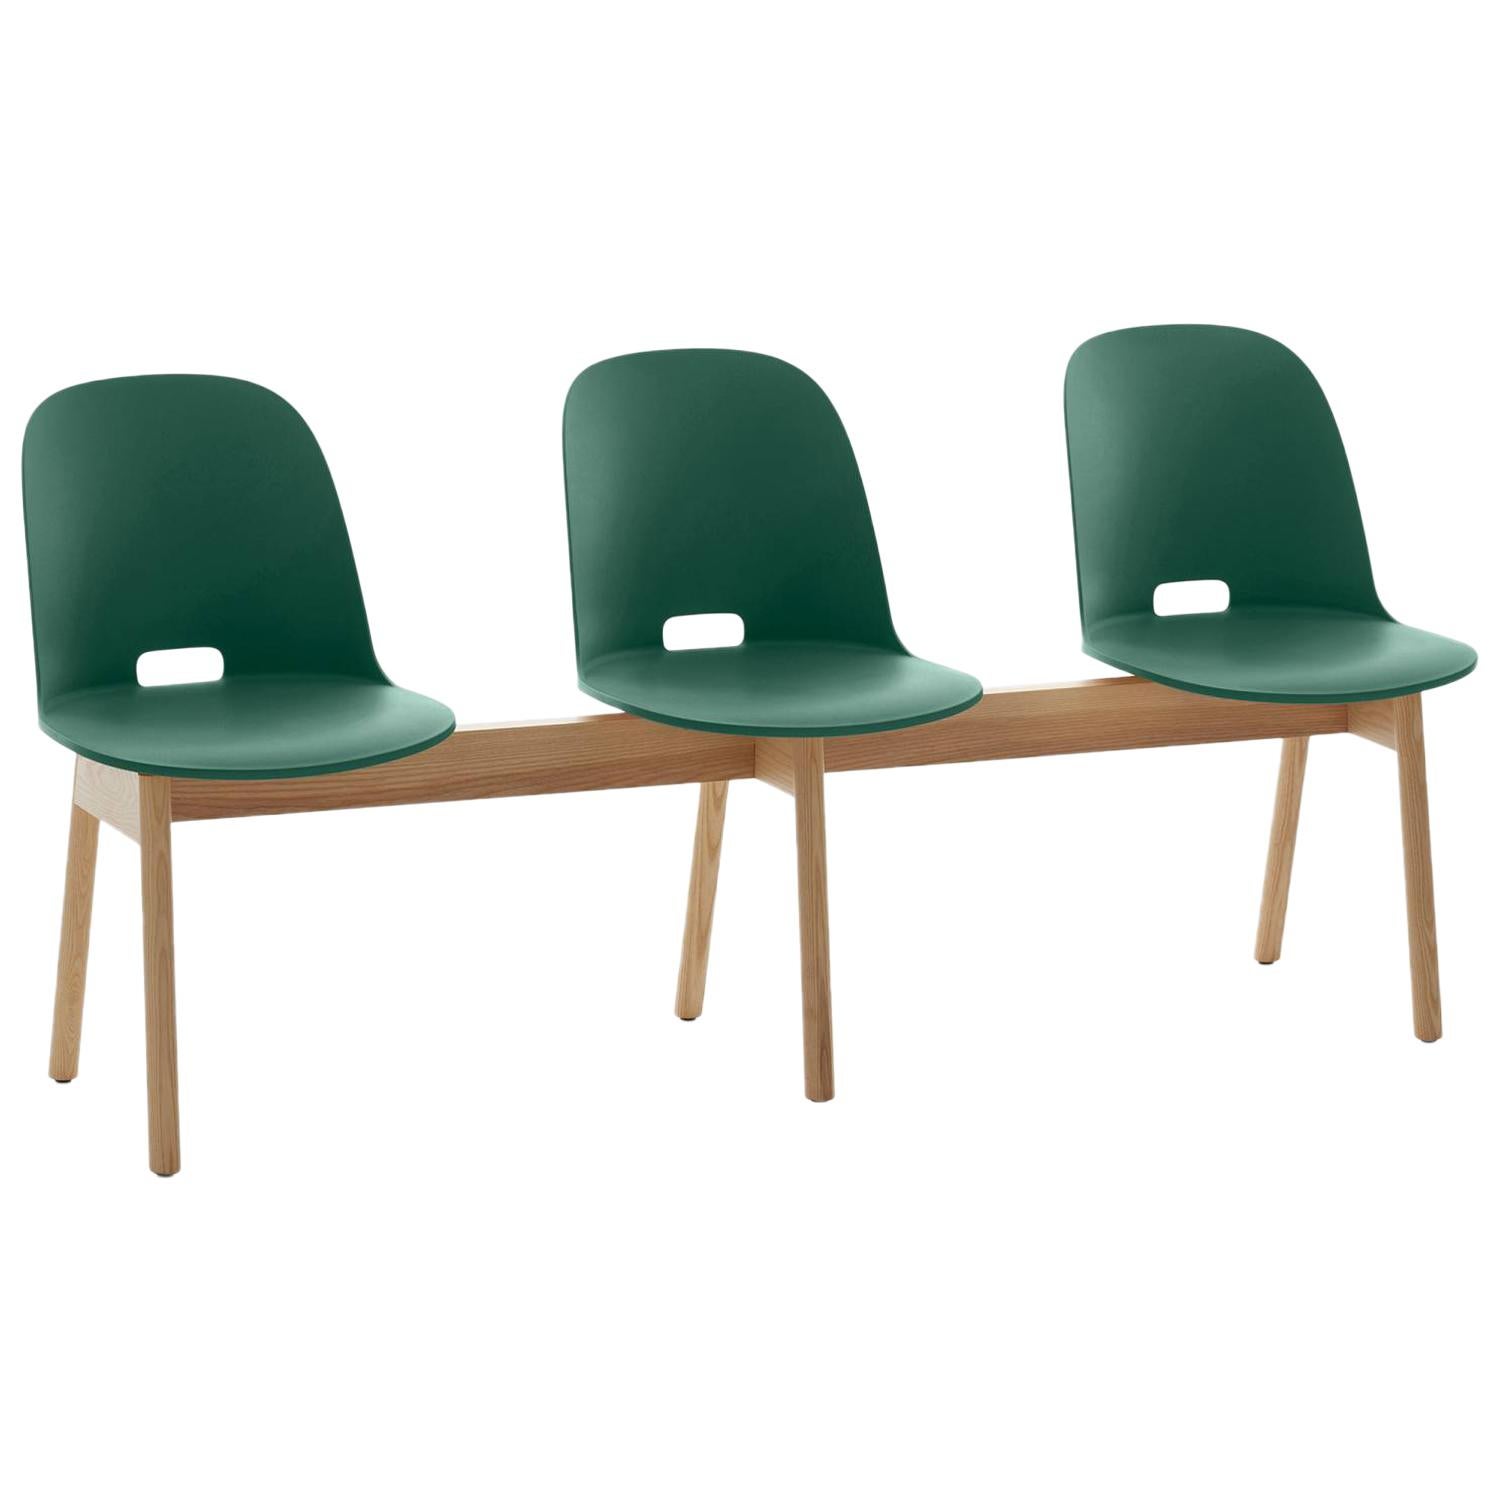 Emeco Alfi 3-Seat Bench in Green and Ash with High Back by Jasper Morrison 